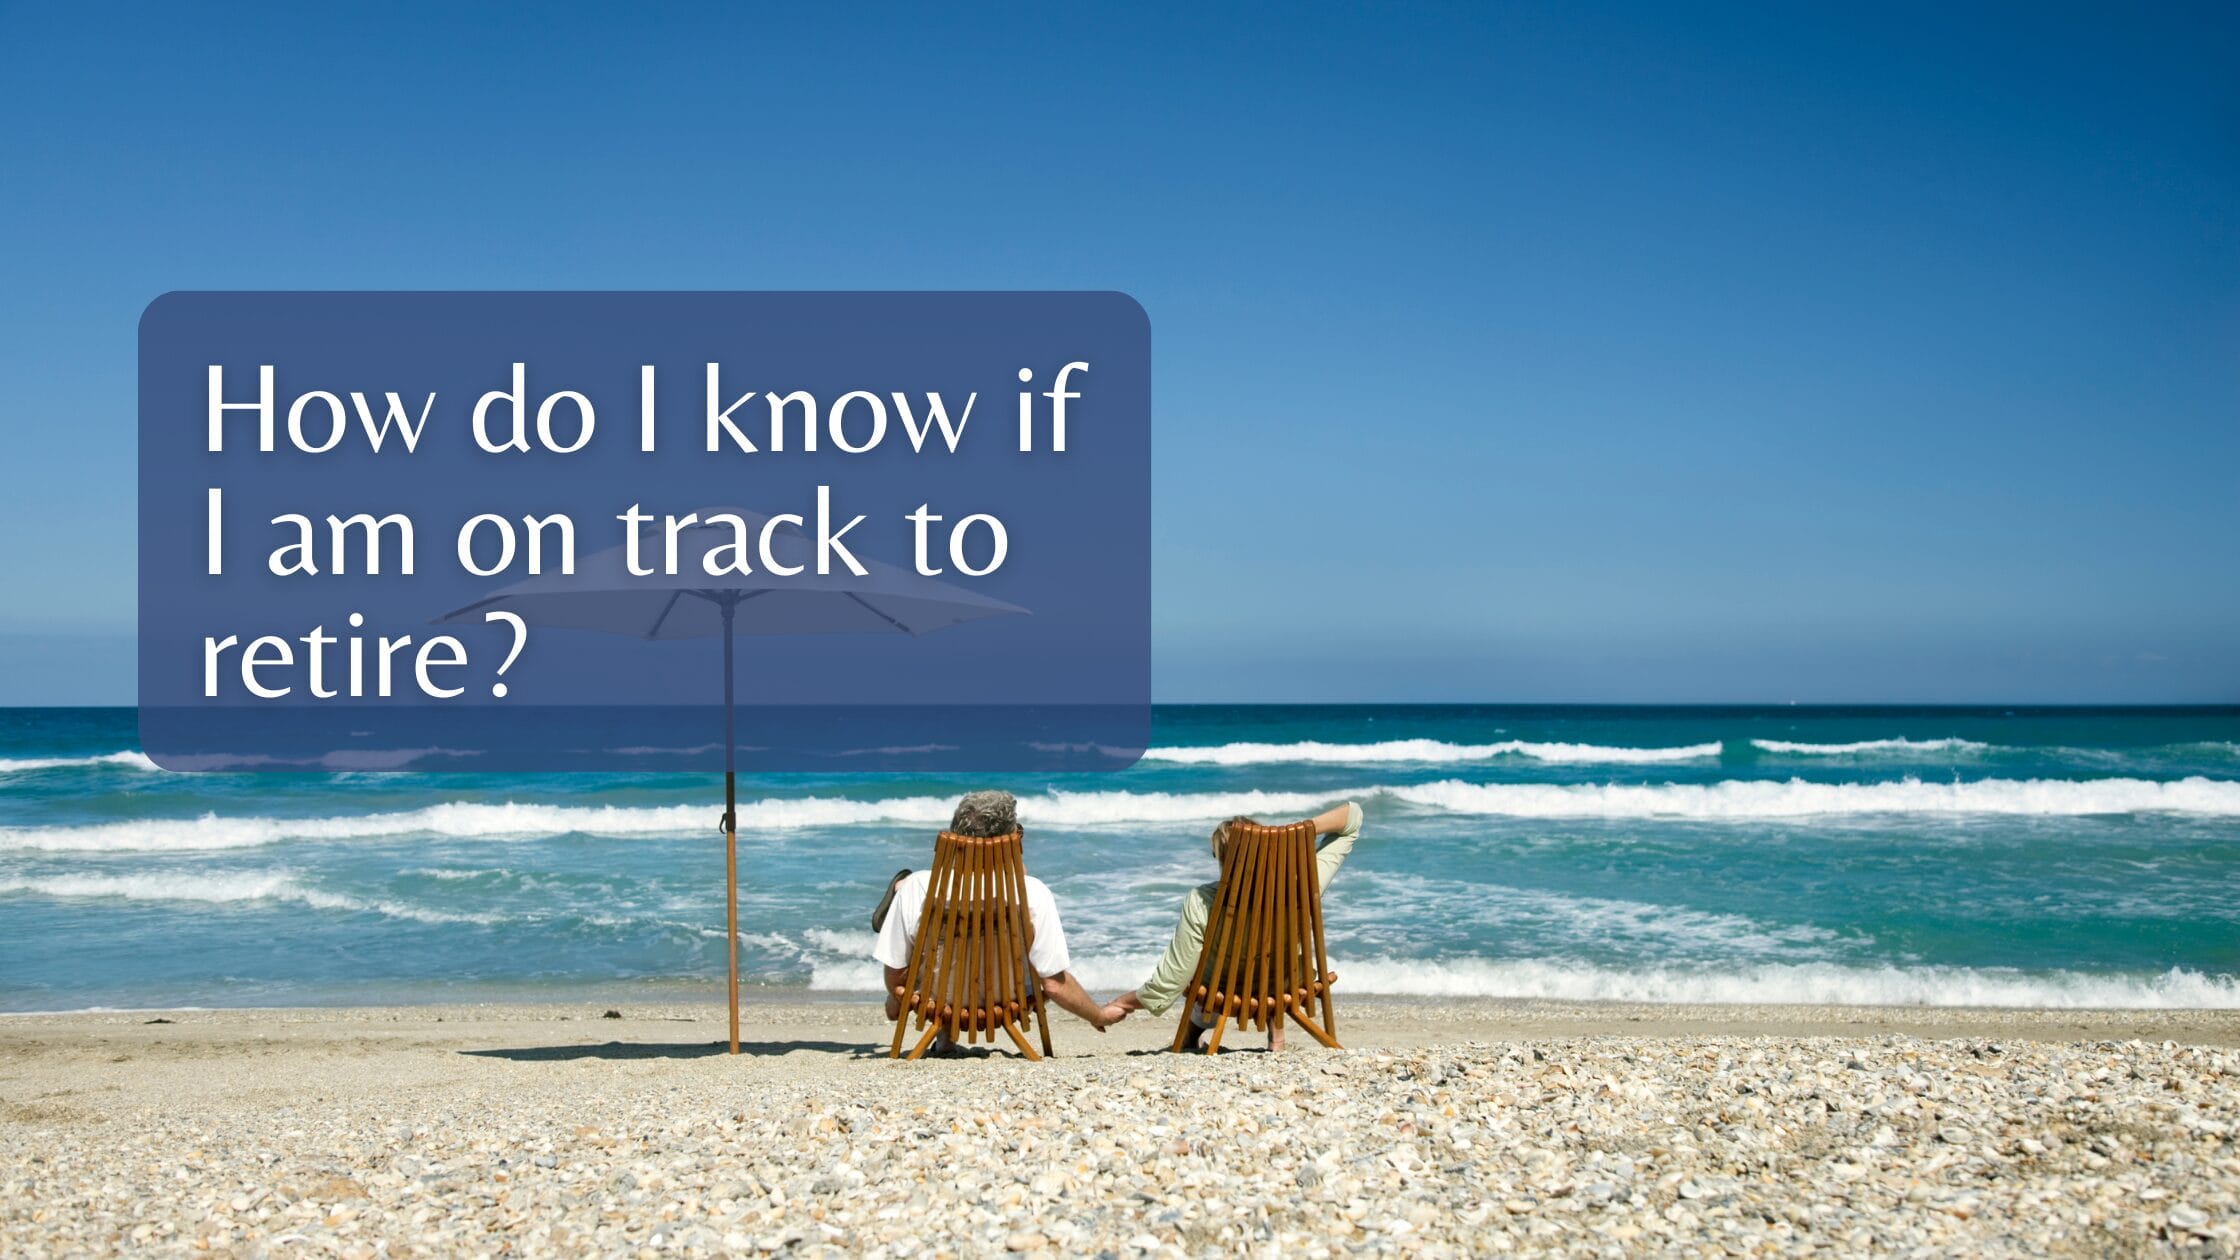 How do I know if I am on track to retire?